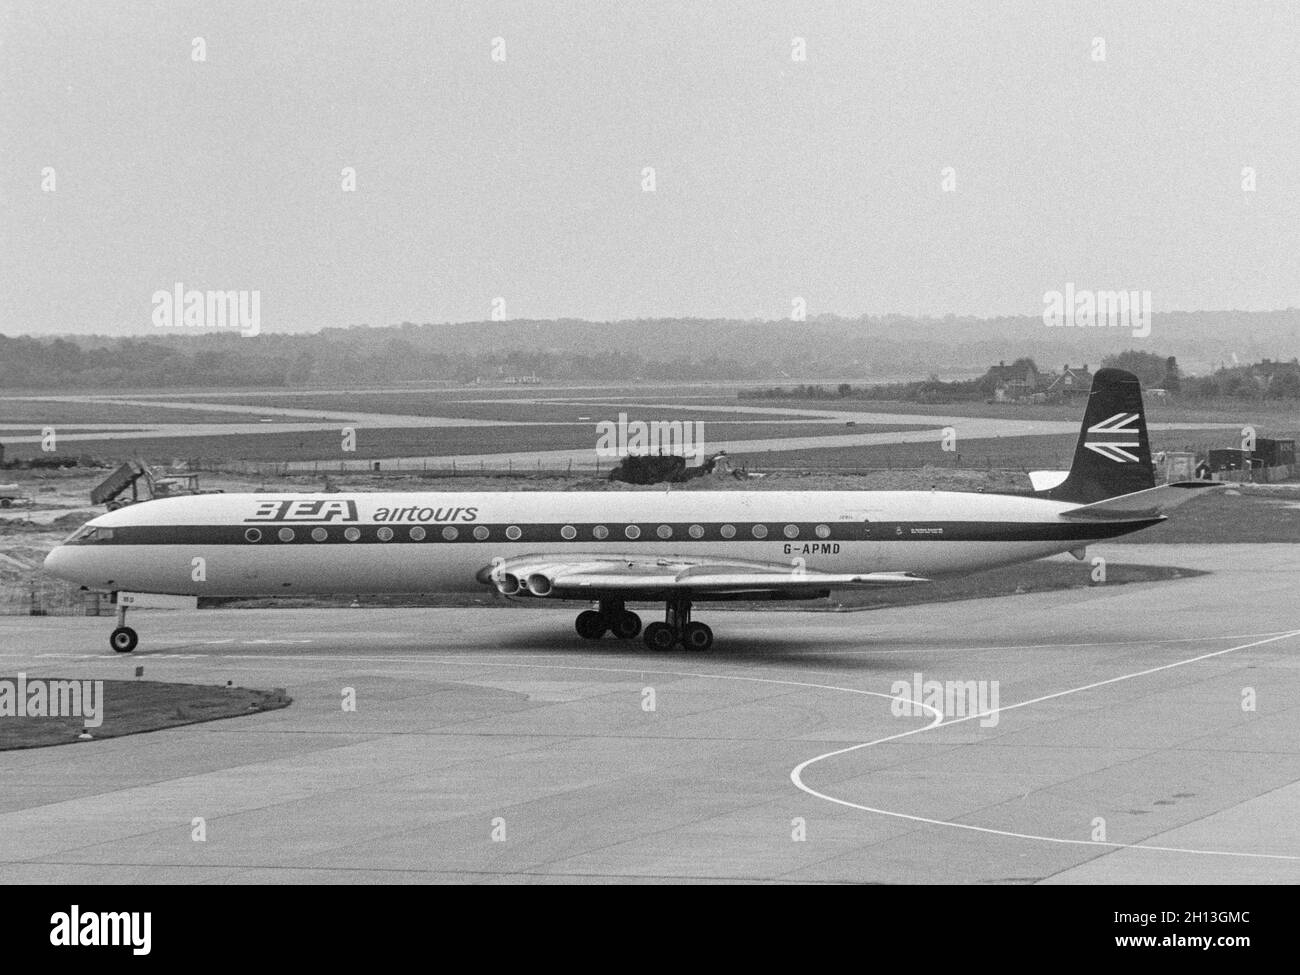 A De Havilland Comet 4B Airliner owned by BEA Airtours, British European Airways, at London Heathrow Airport IN 1971. Stock Photo